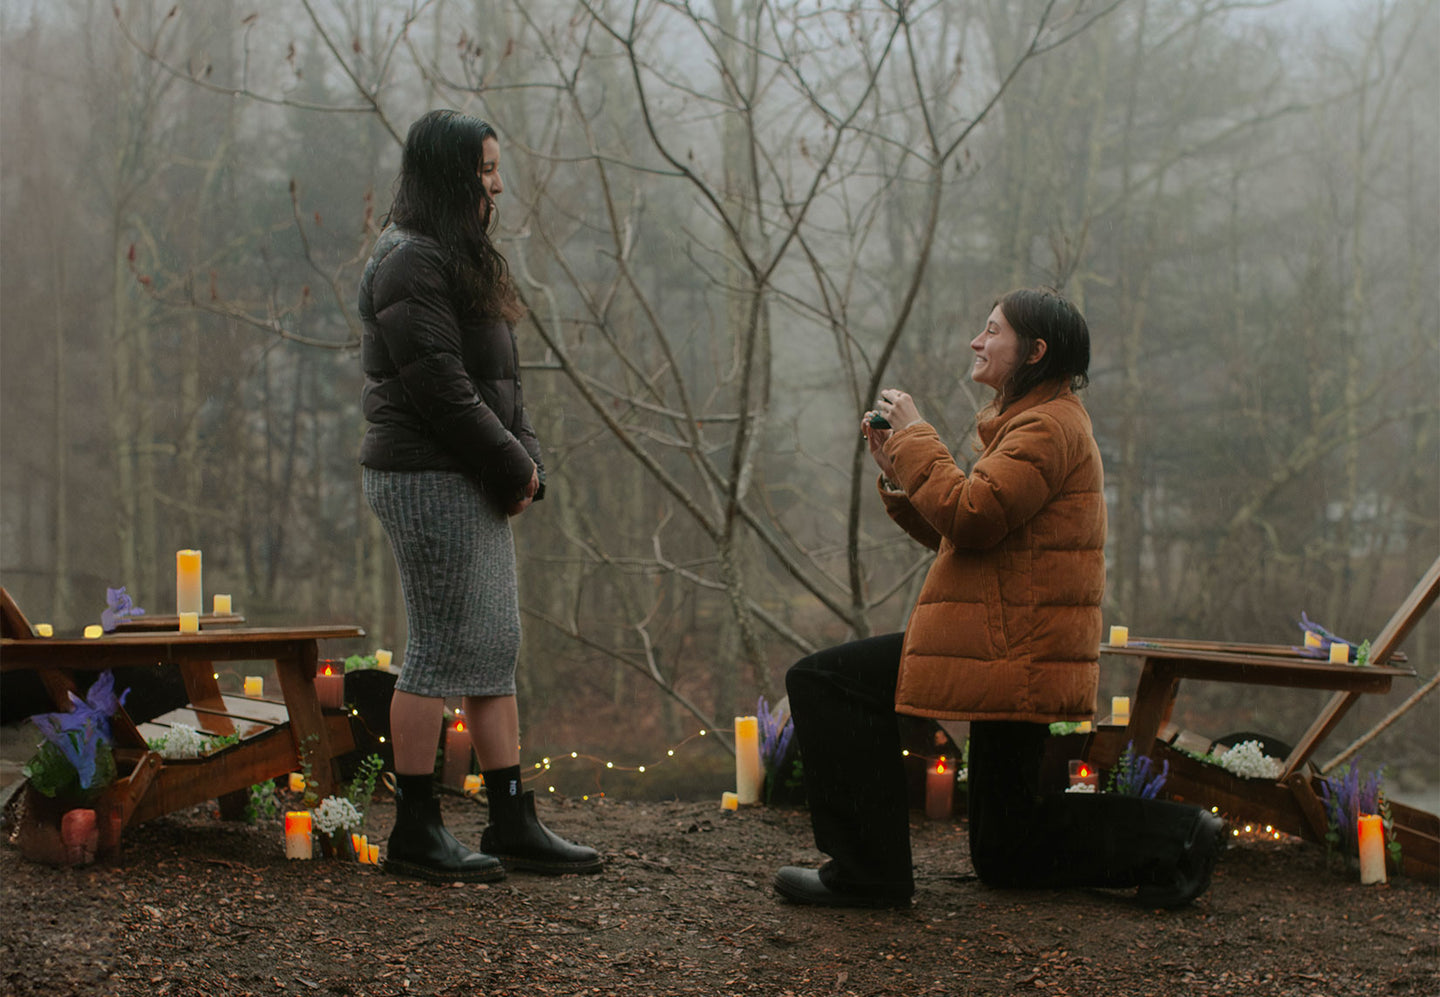 Partner gets down on one knee to propose to the other partner